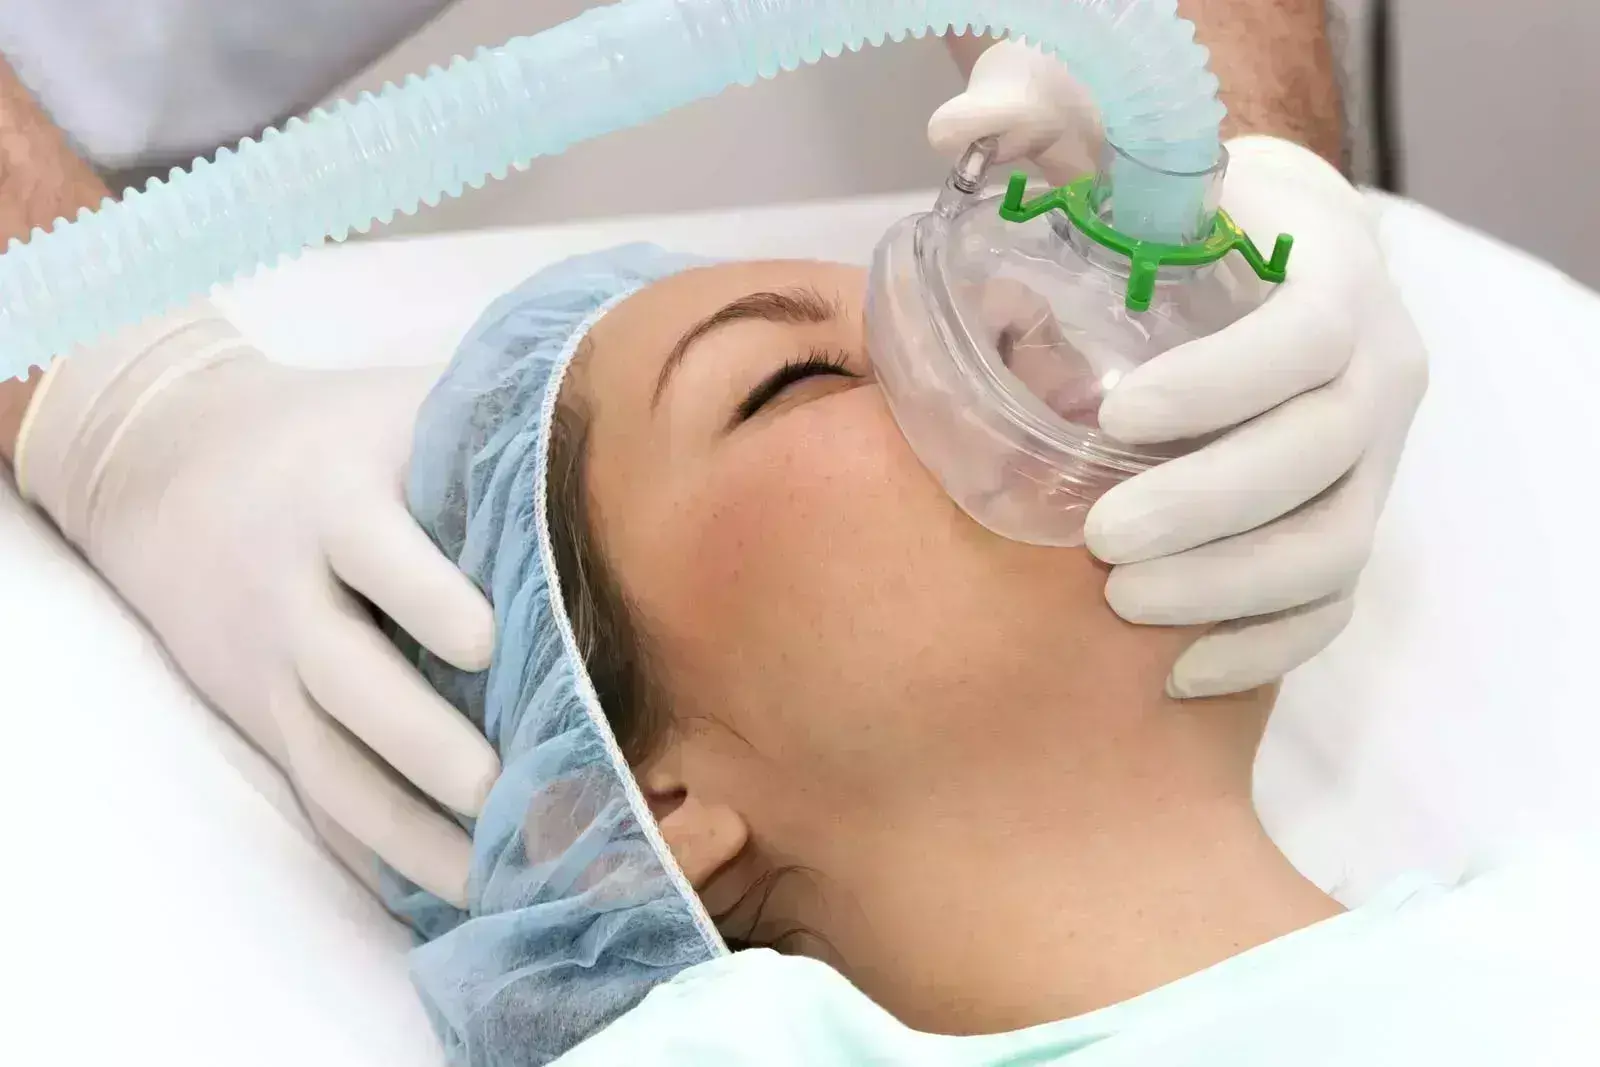 How effective is Face mask ventilation before and after neuromuscular blockade?